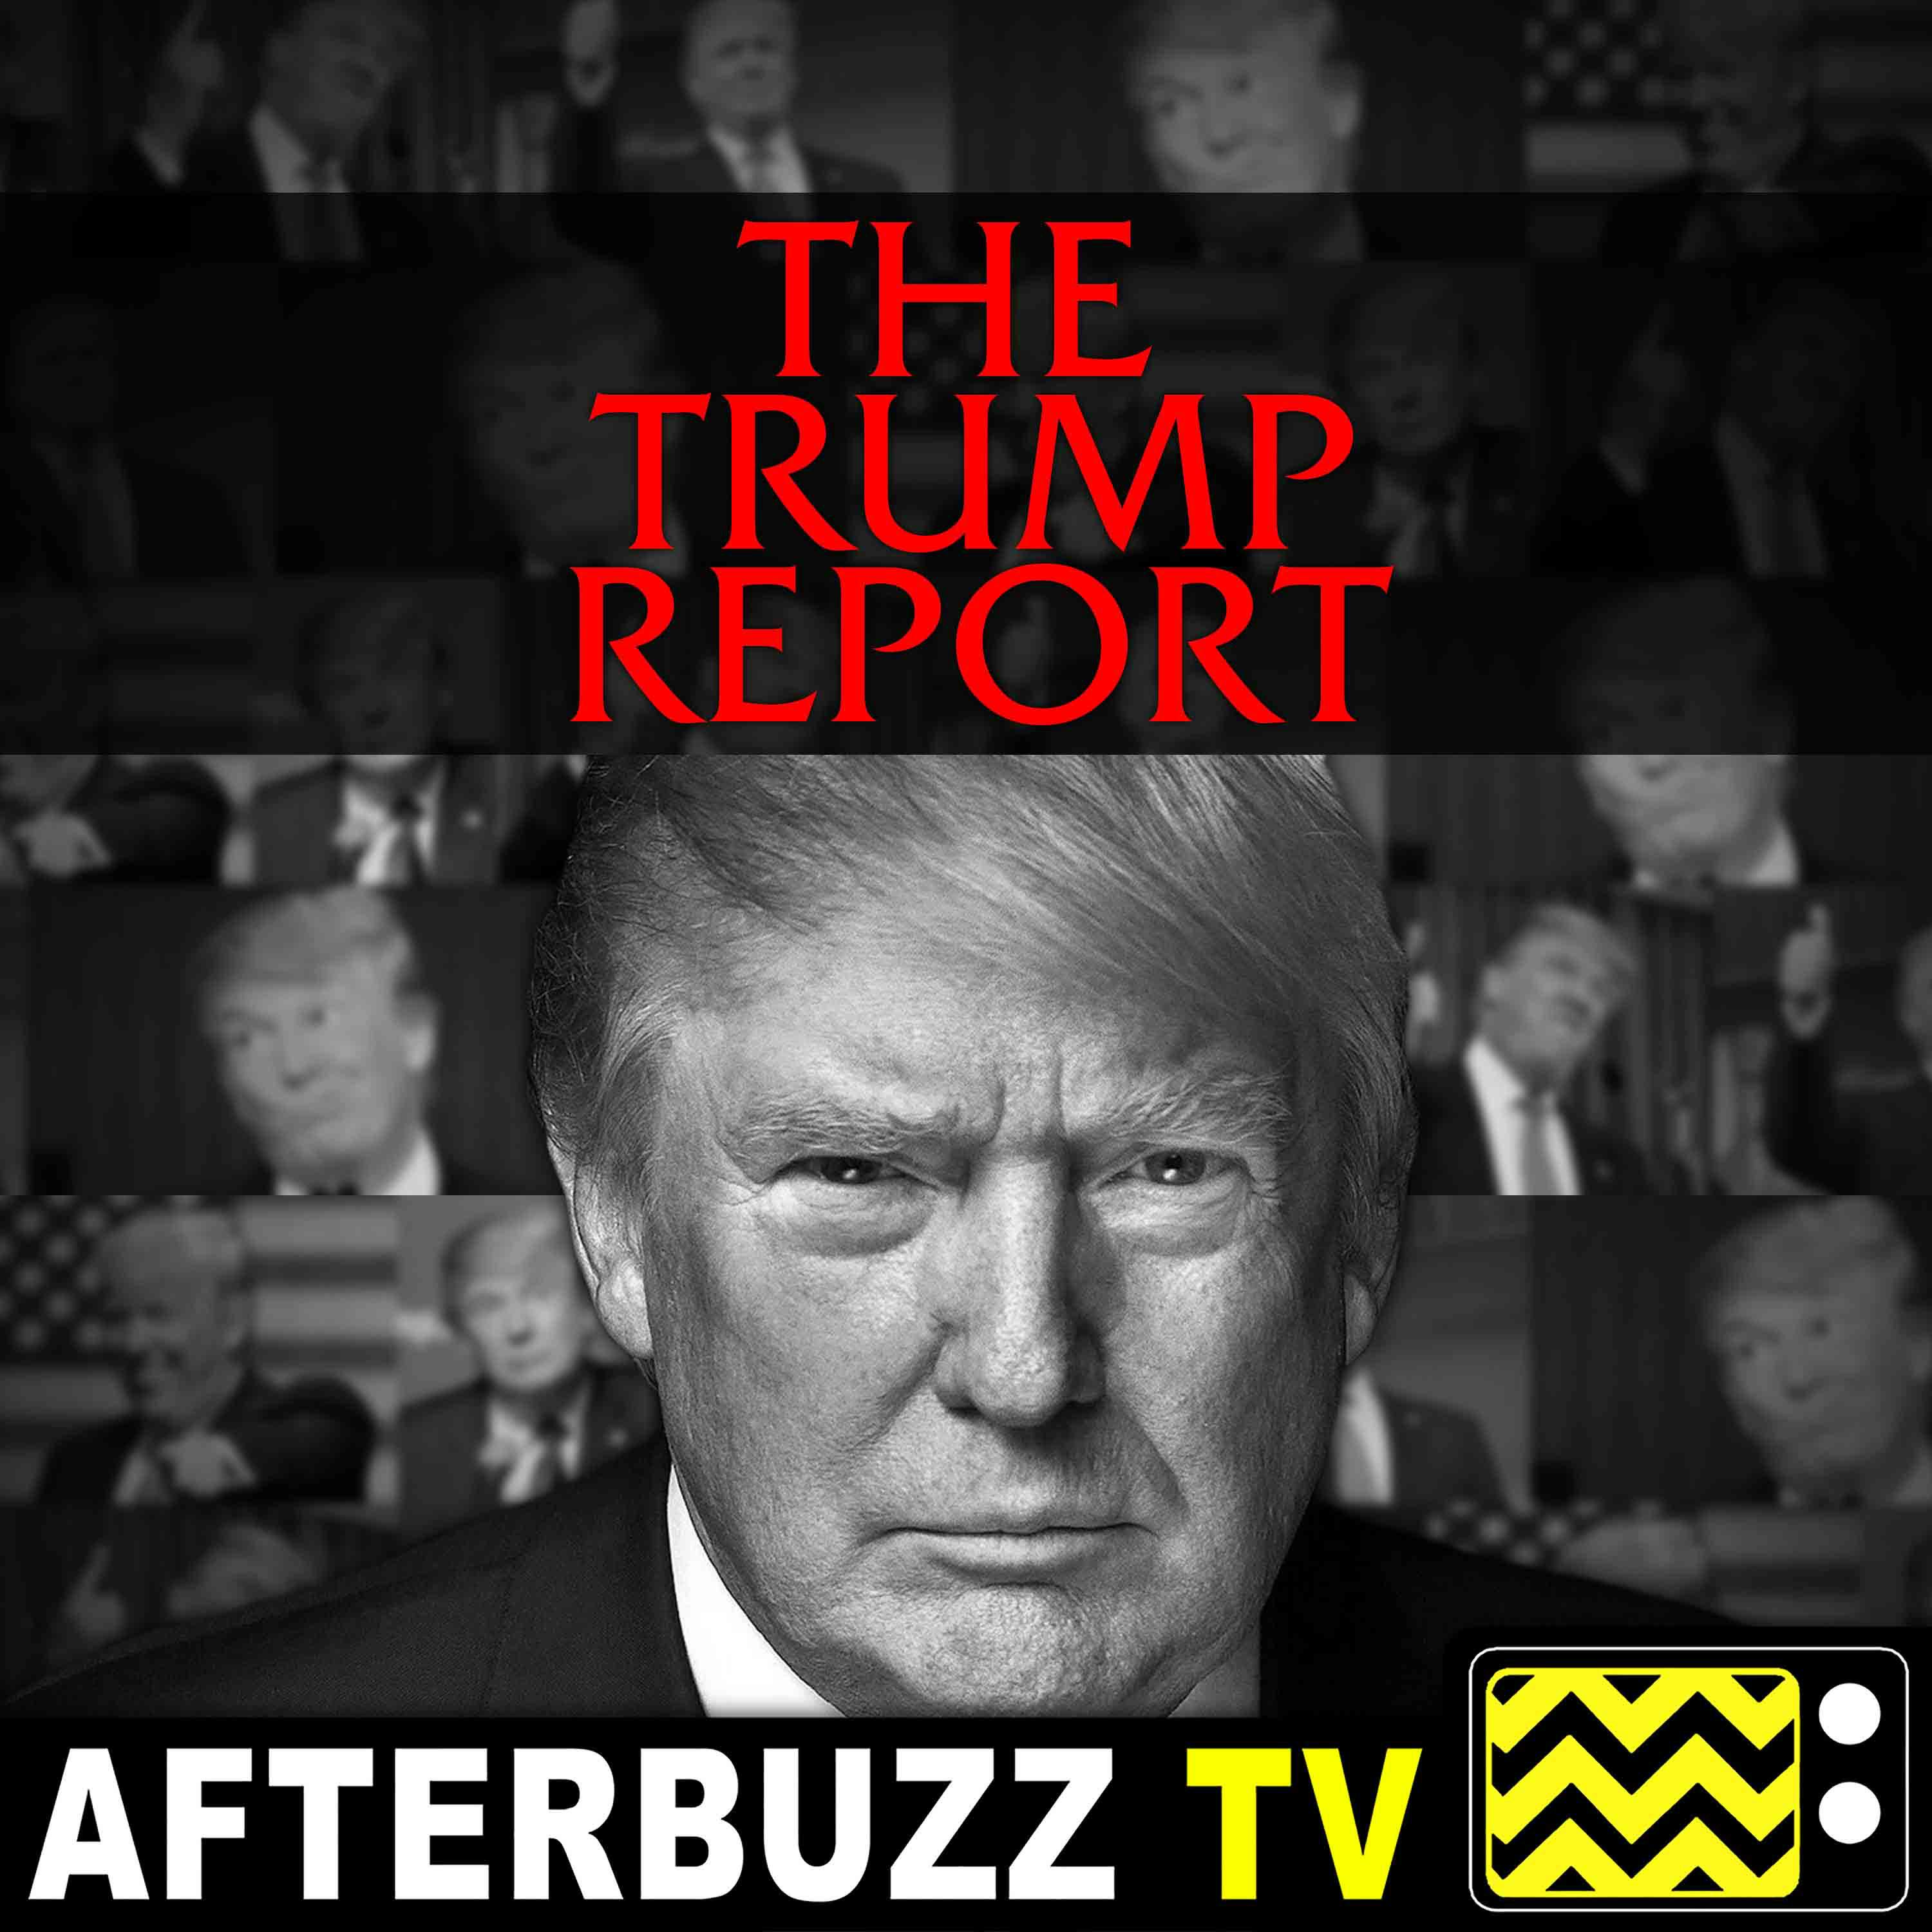 Briefer Briefings, Disinfectant and Kim Jong Dead? 4/28/20- The Trump Report